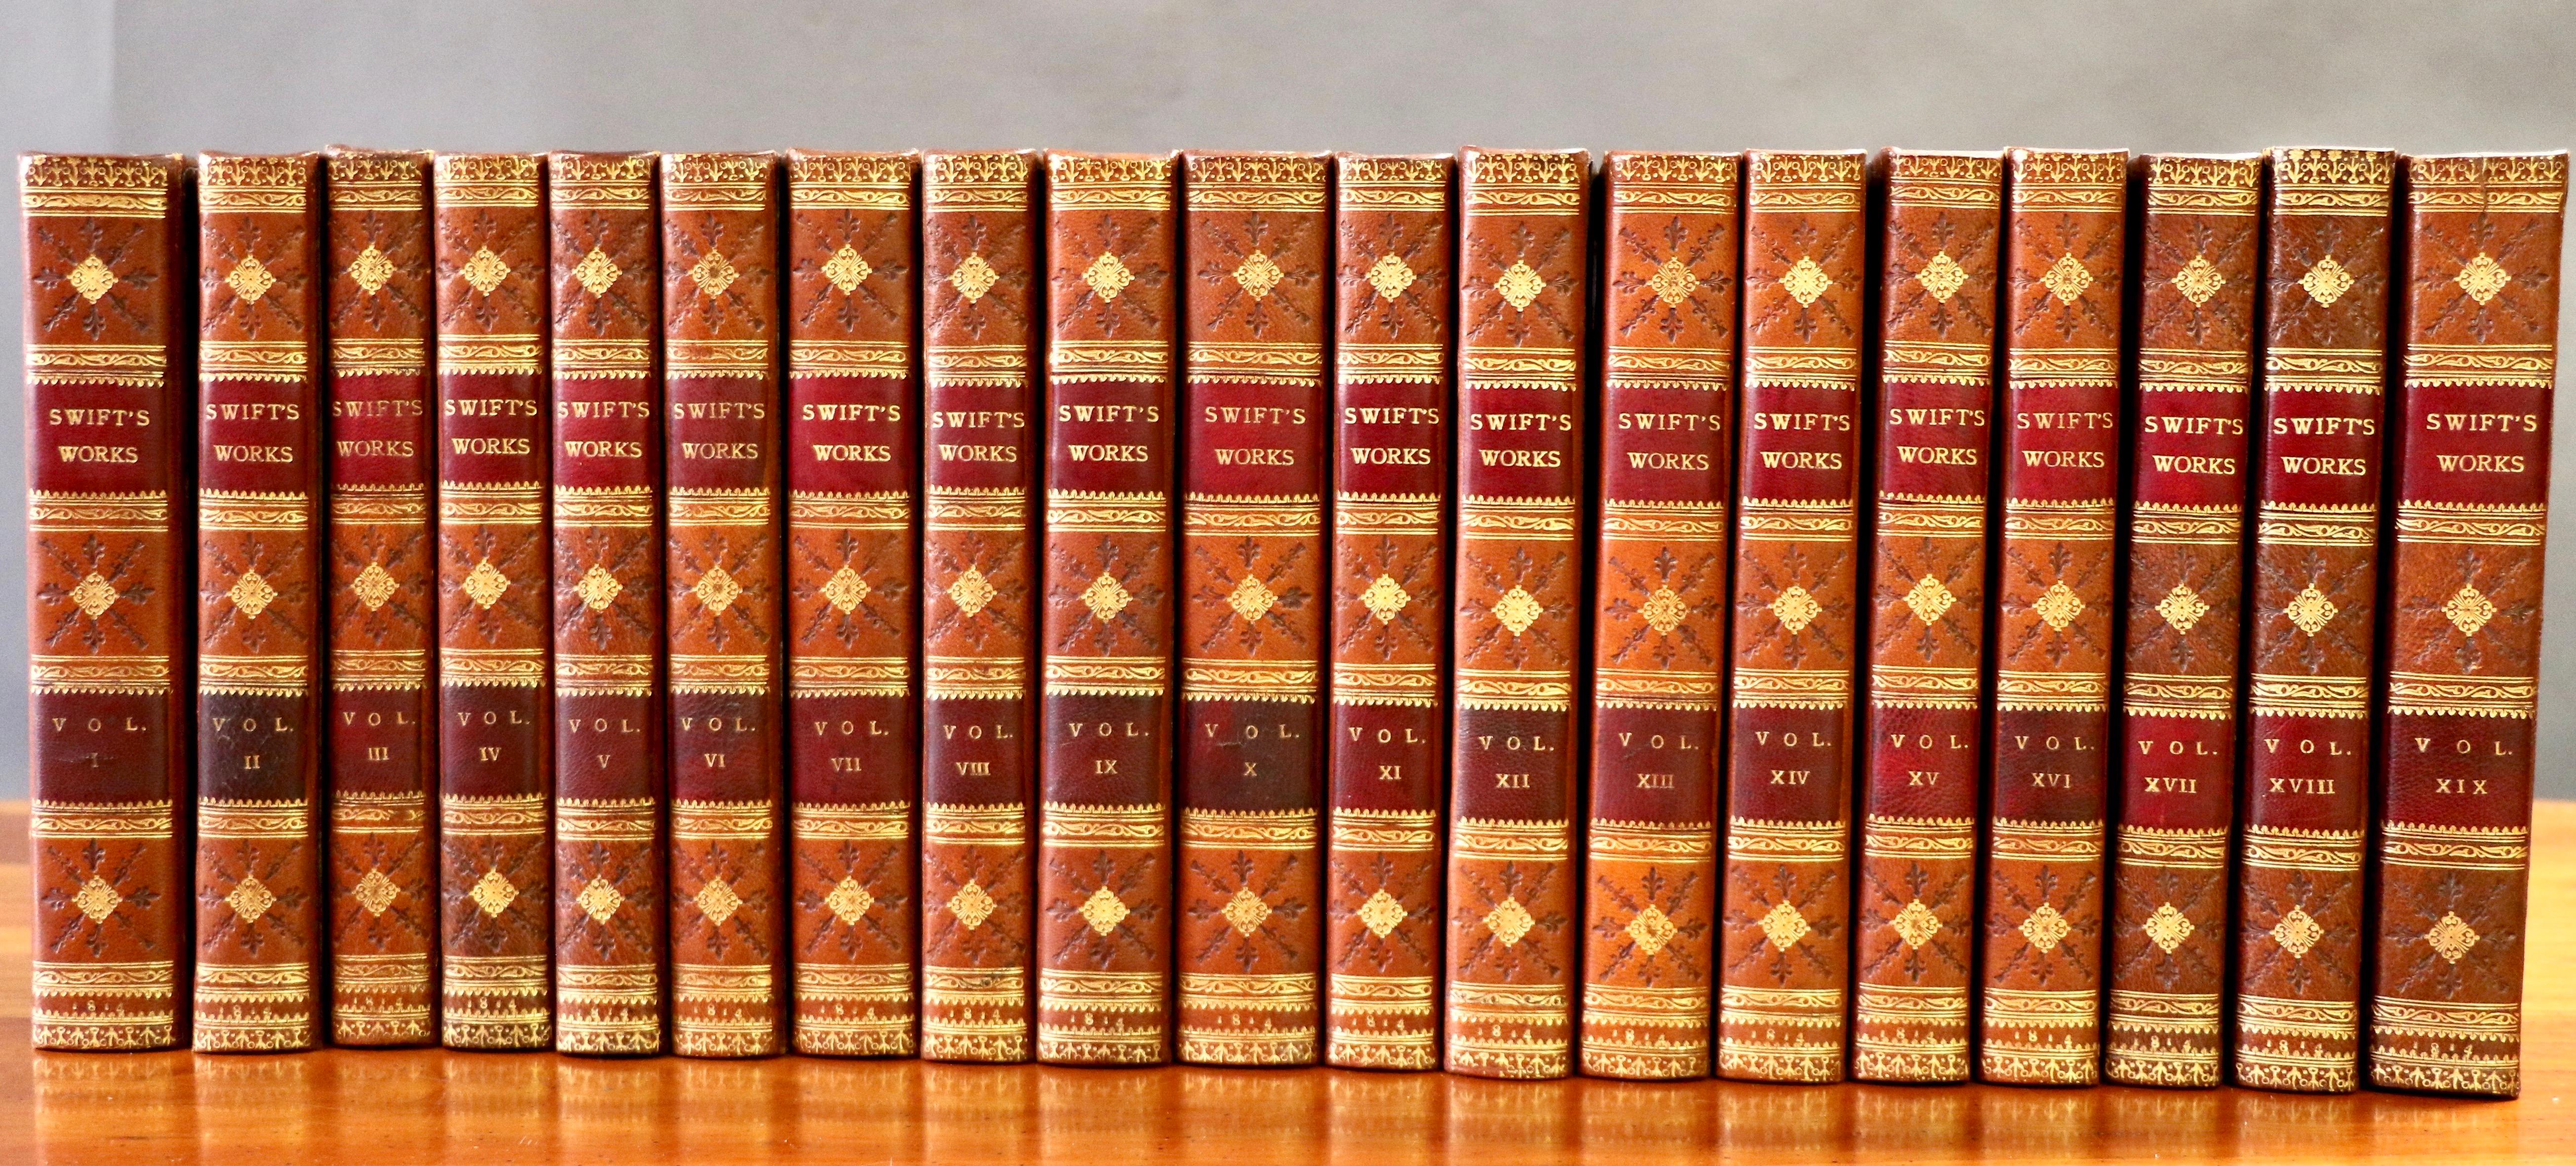 Works of Jonathan Swift Works, 19 volumes
Bound in full tan calf, spines neatly repacked, labels.
Published Edinburgh 1814.